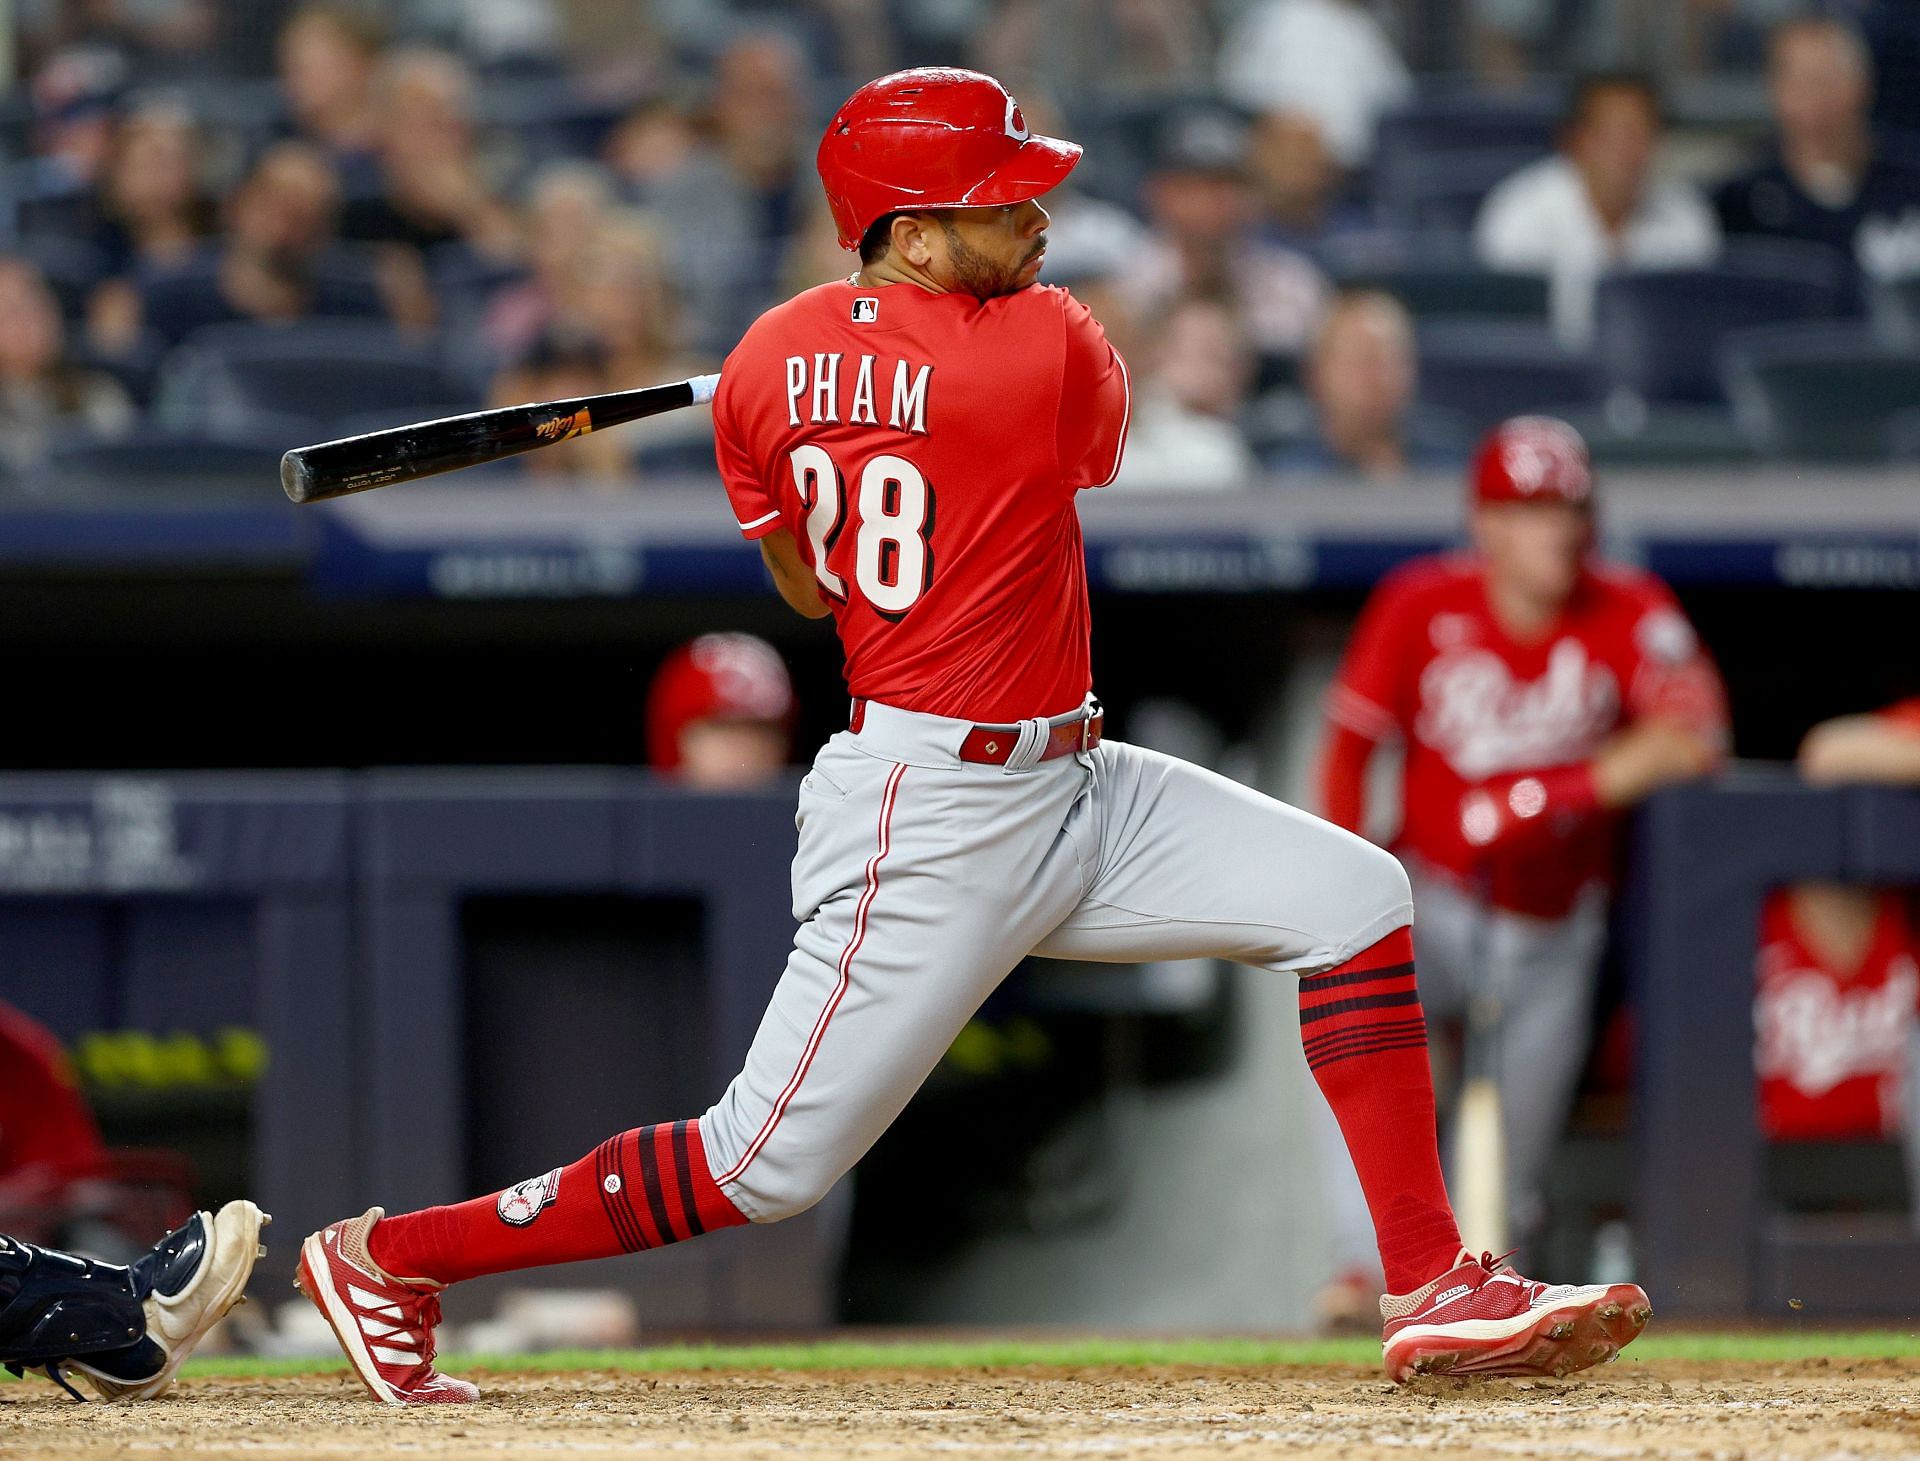 Boston Red Sox Photos: Tommy Pham Walk-off Against New York